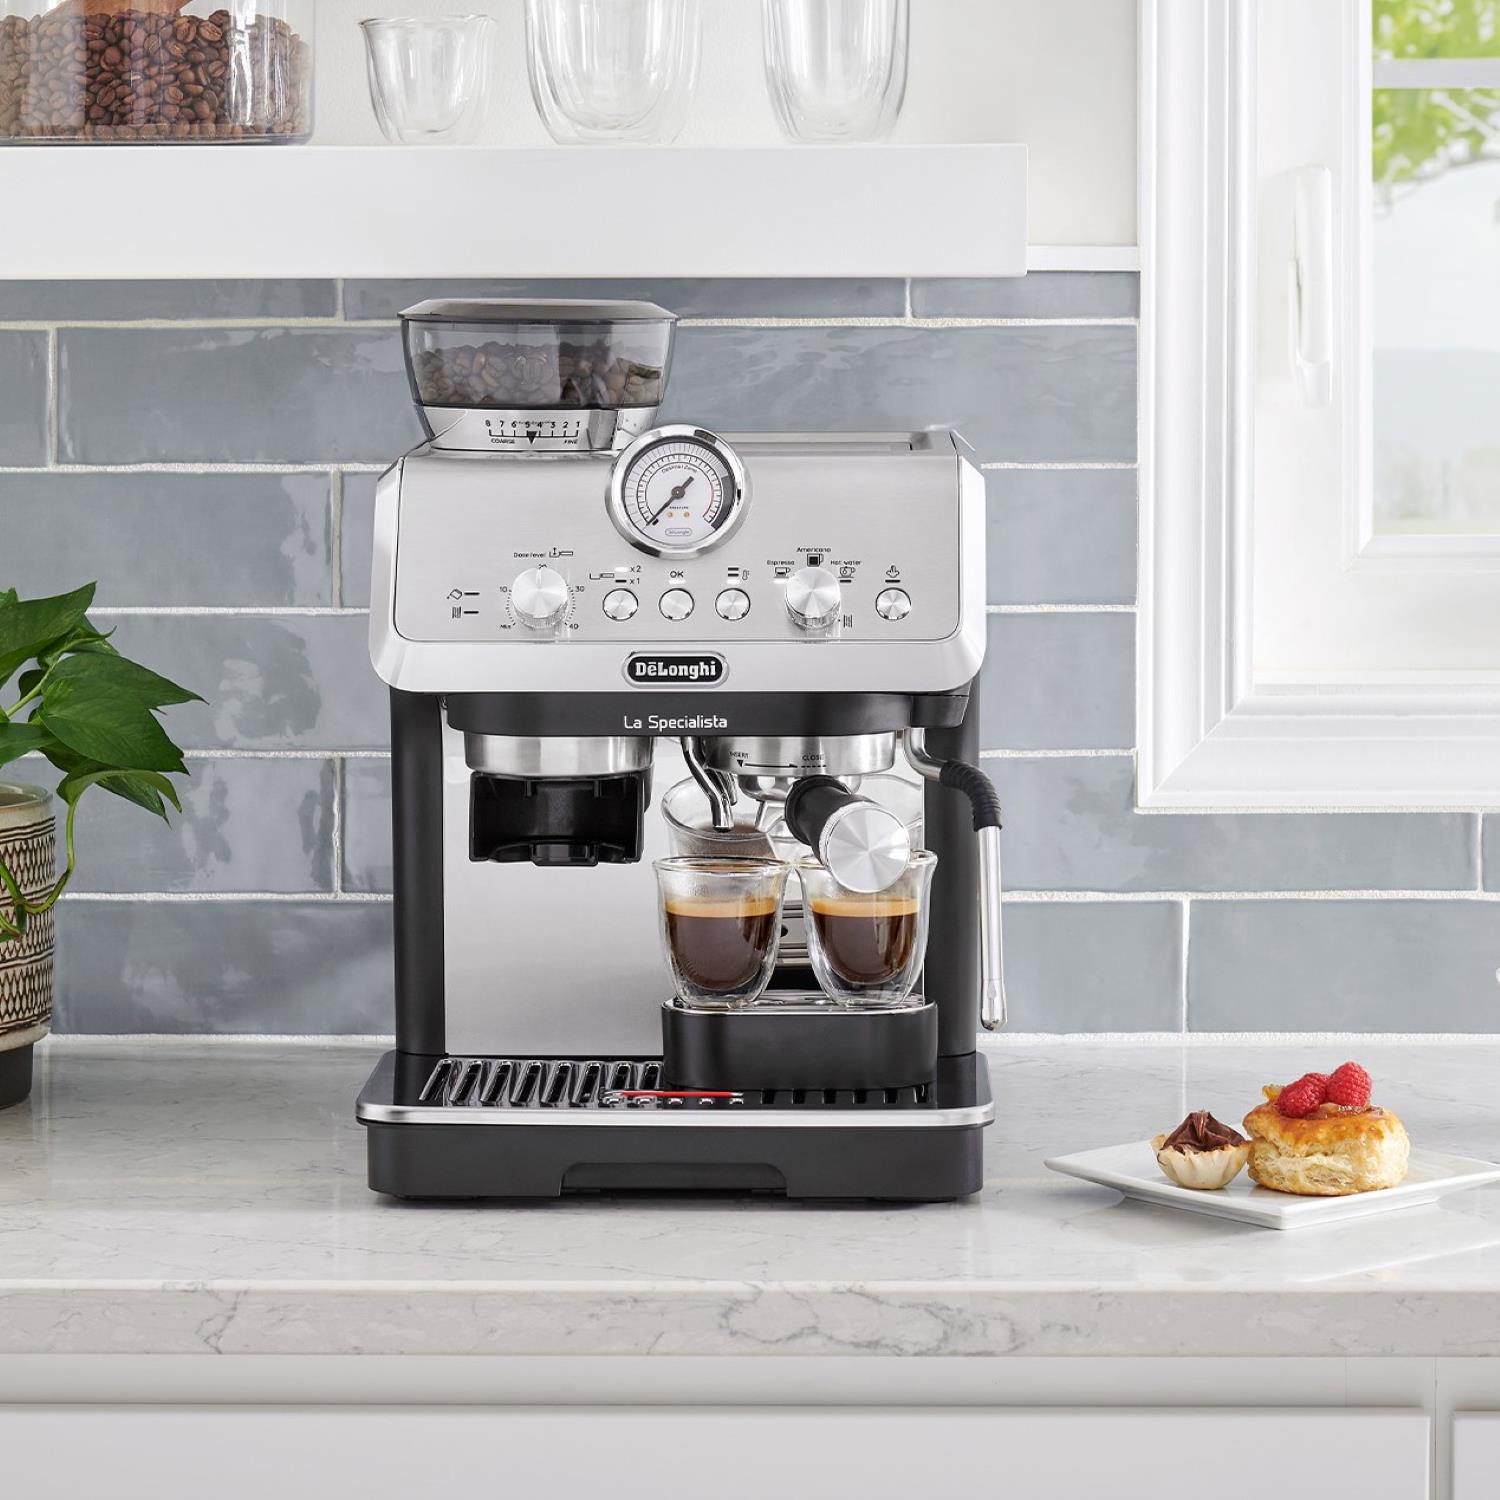 espresso machine buying guide, what to look for in an espresso machine, de'longhi espresso machines